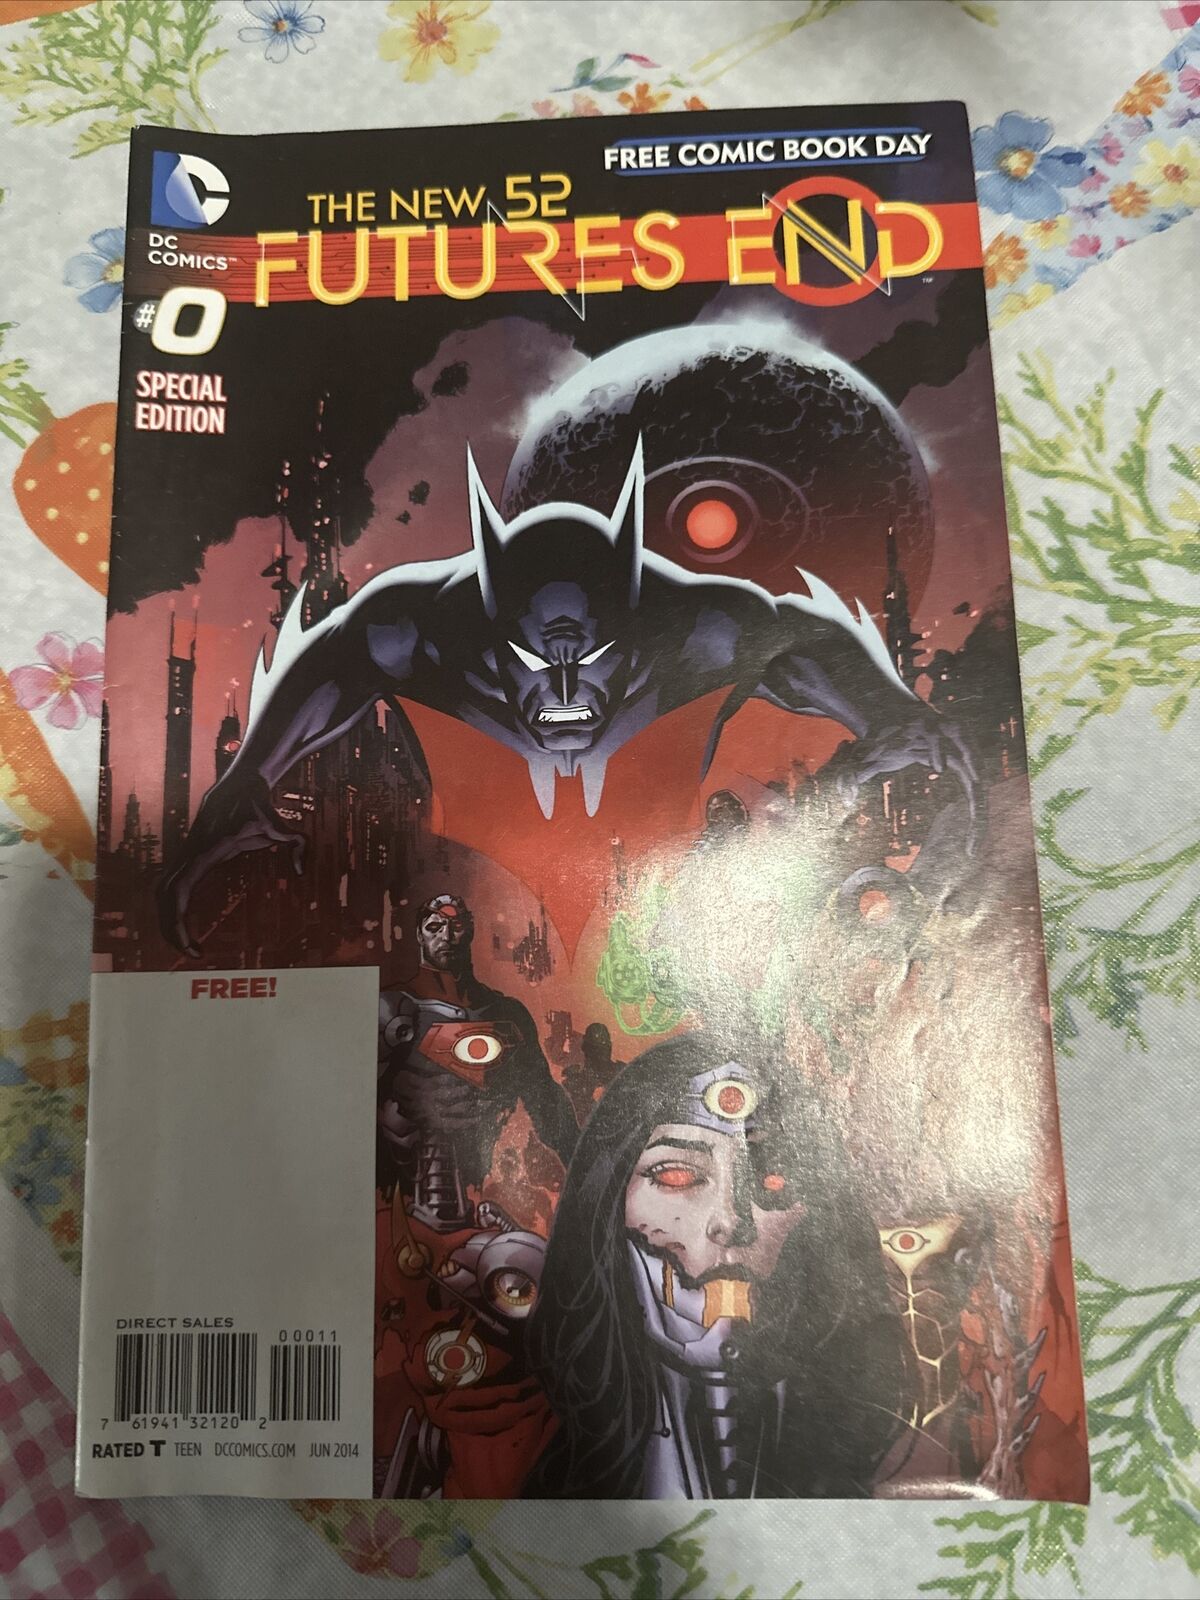 The New 52: Futures End tpb Vol 1 - Special Edition